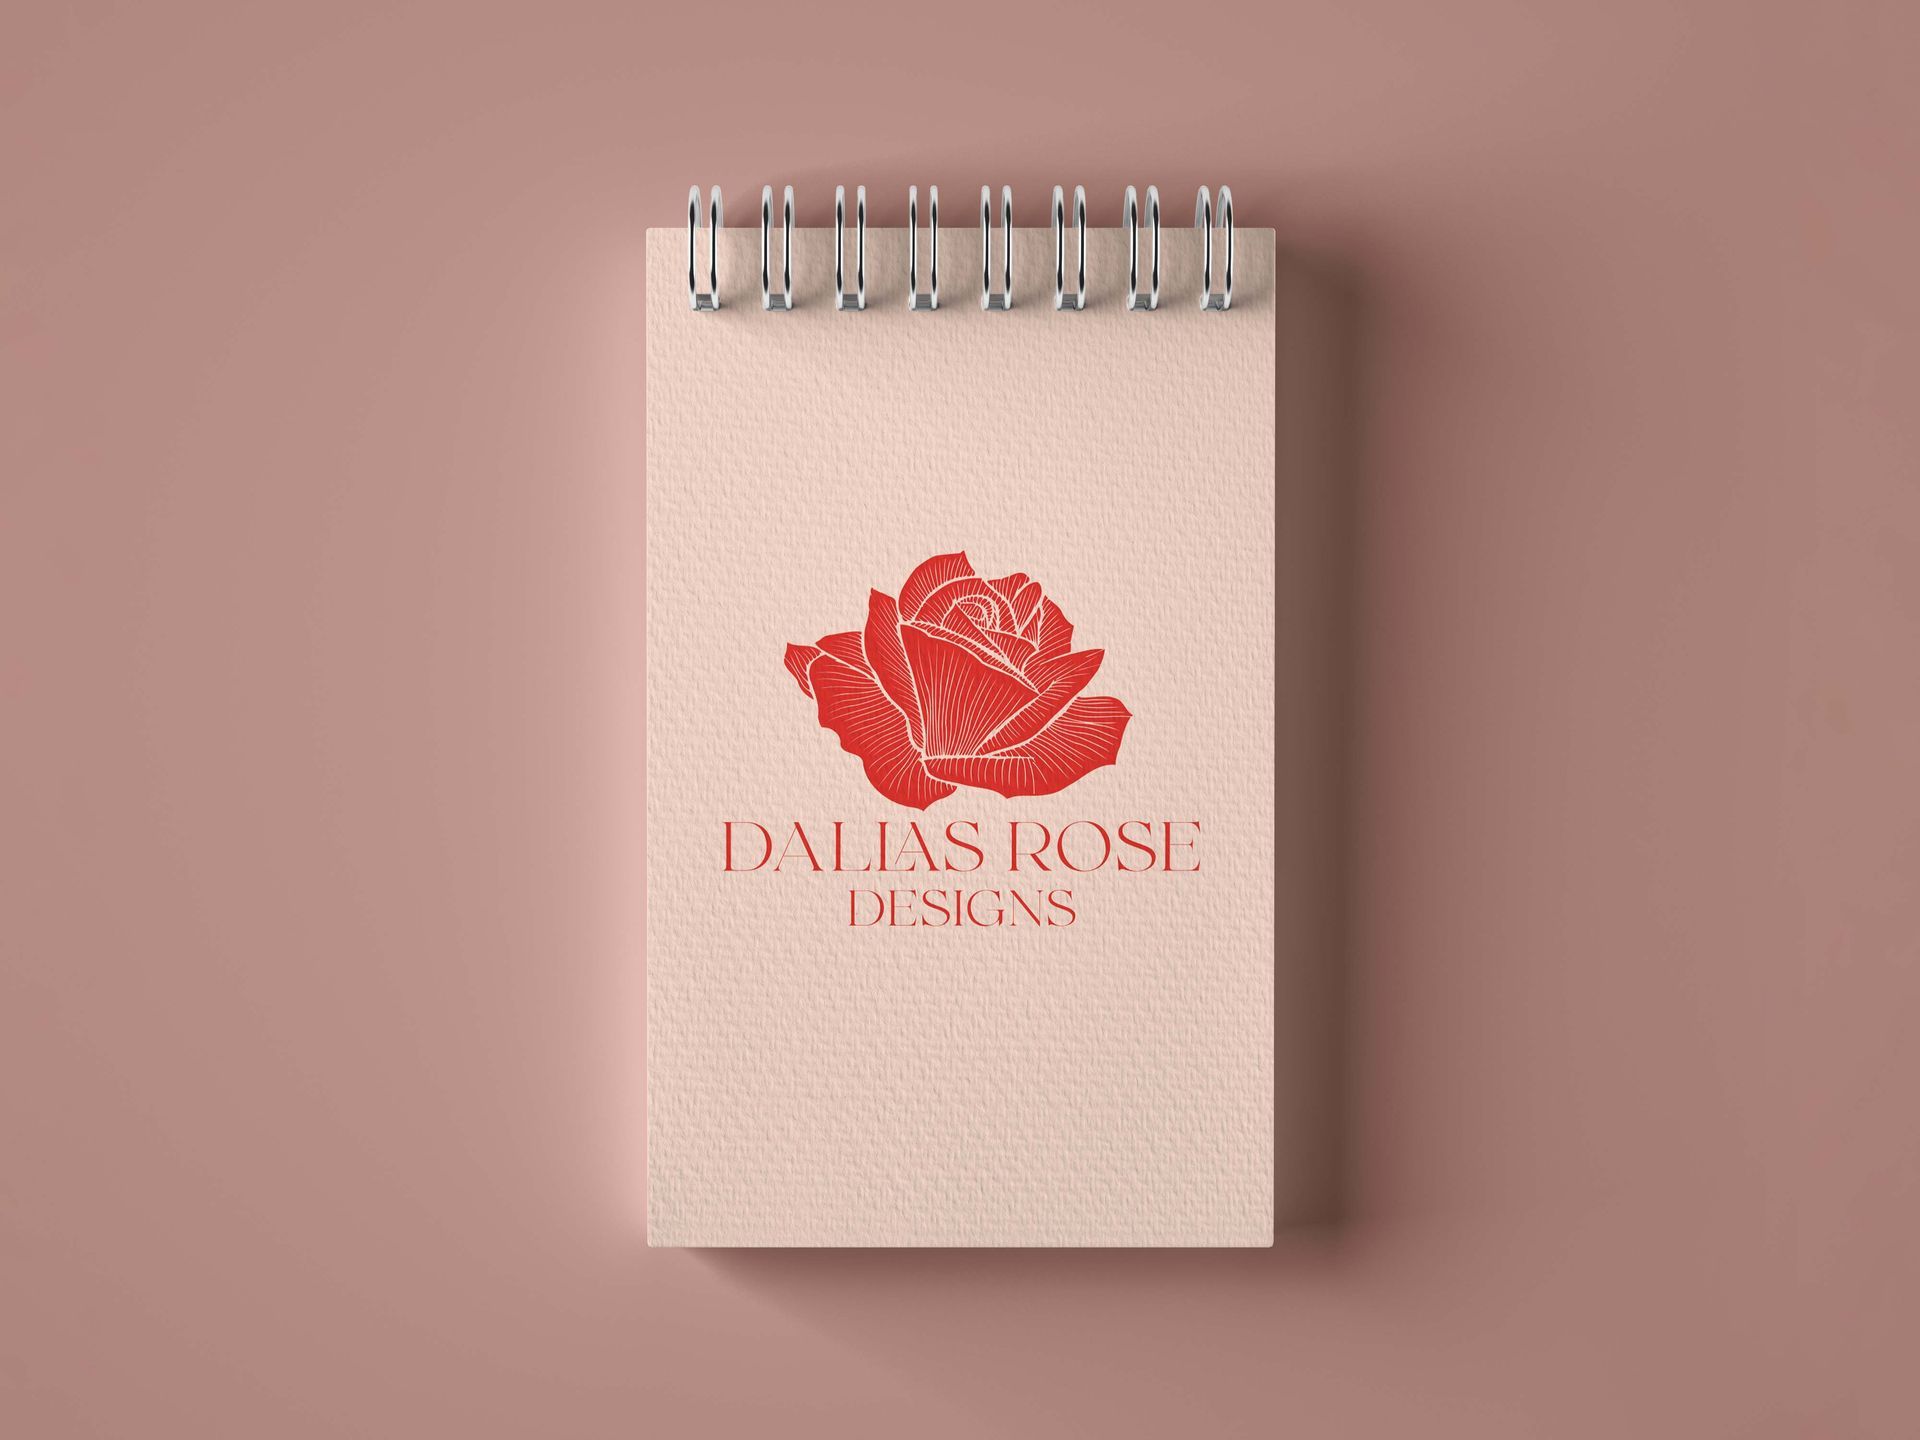 A notebook with a red rose on it is sitting on a pink surface.